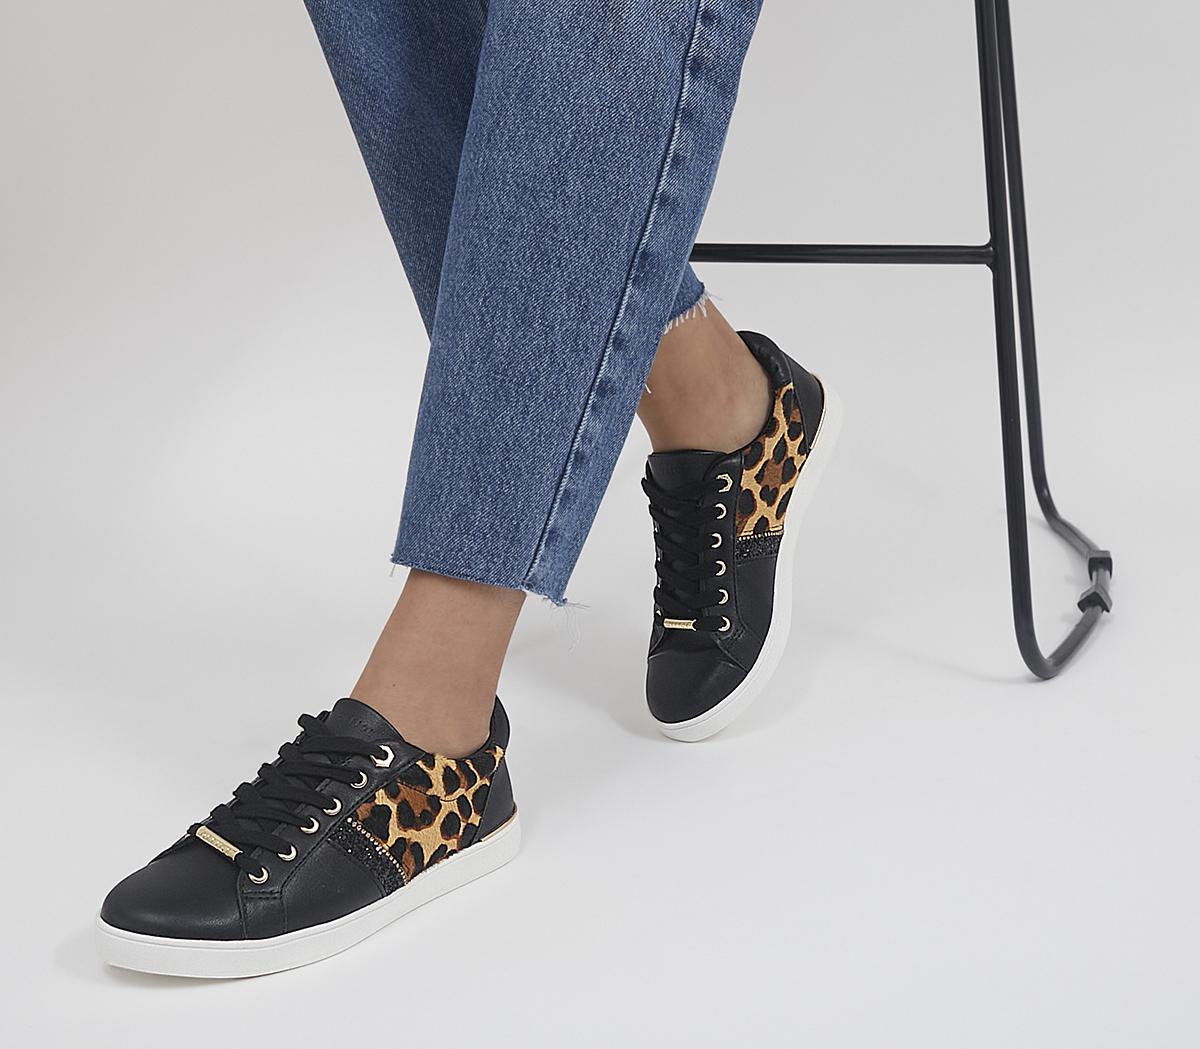 Forgive Embellished Lace Up Trainers Black Leopard Pony Mix